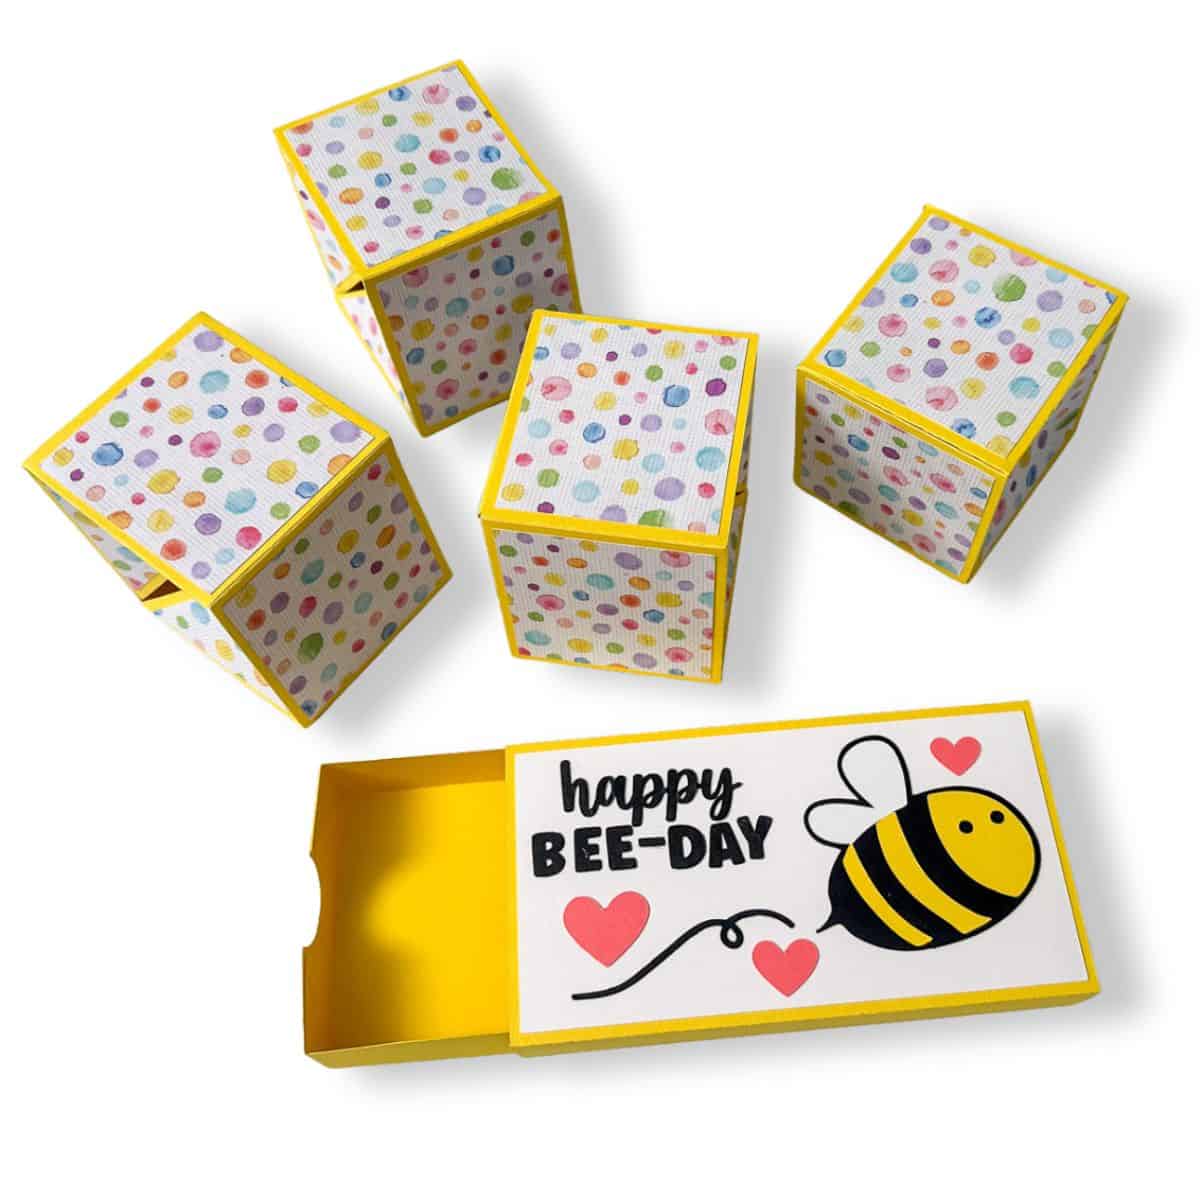 Happy Bee Day Pop-Up Box SVG Cut File.